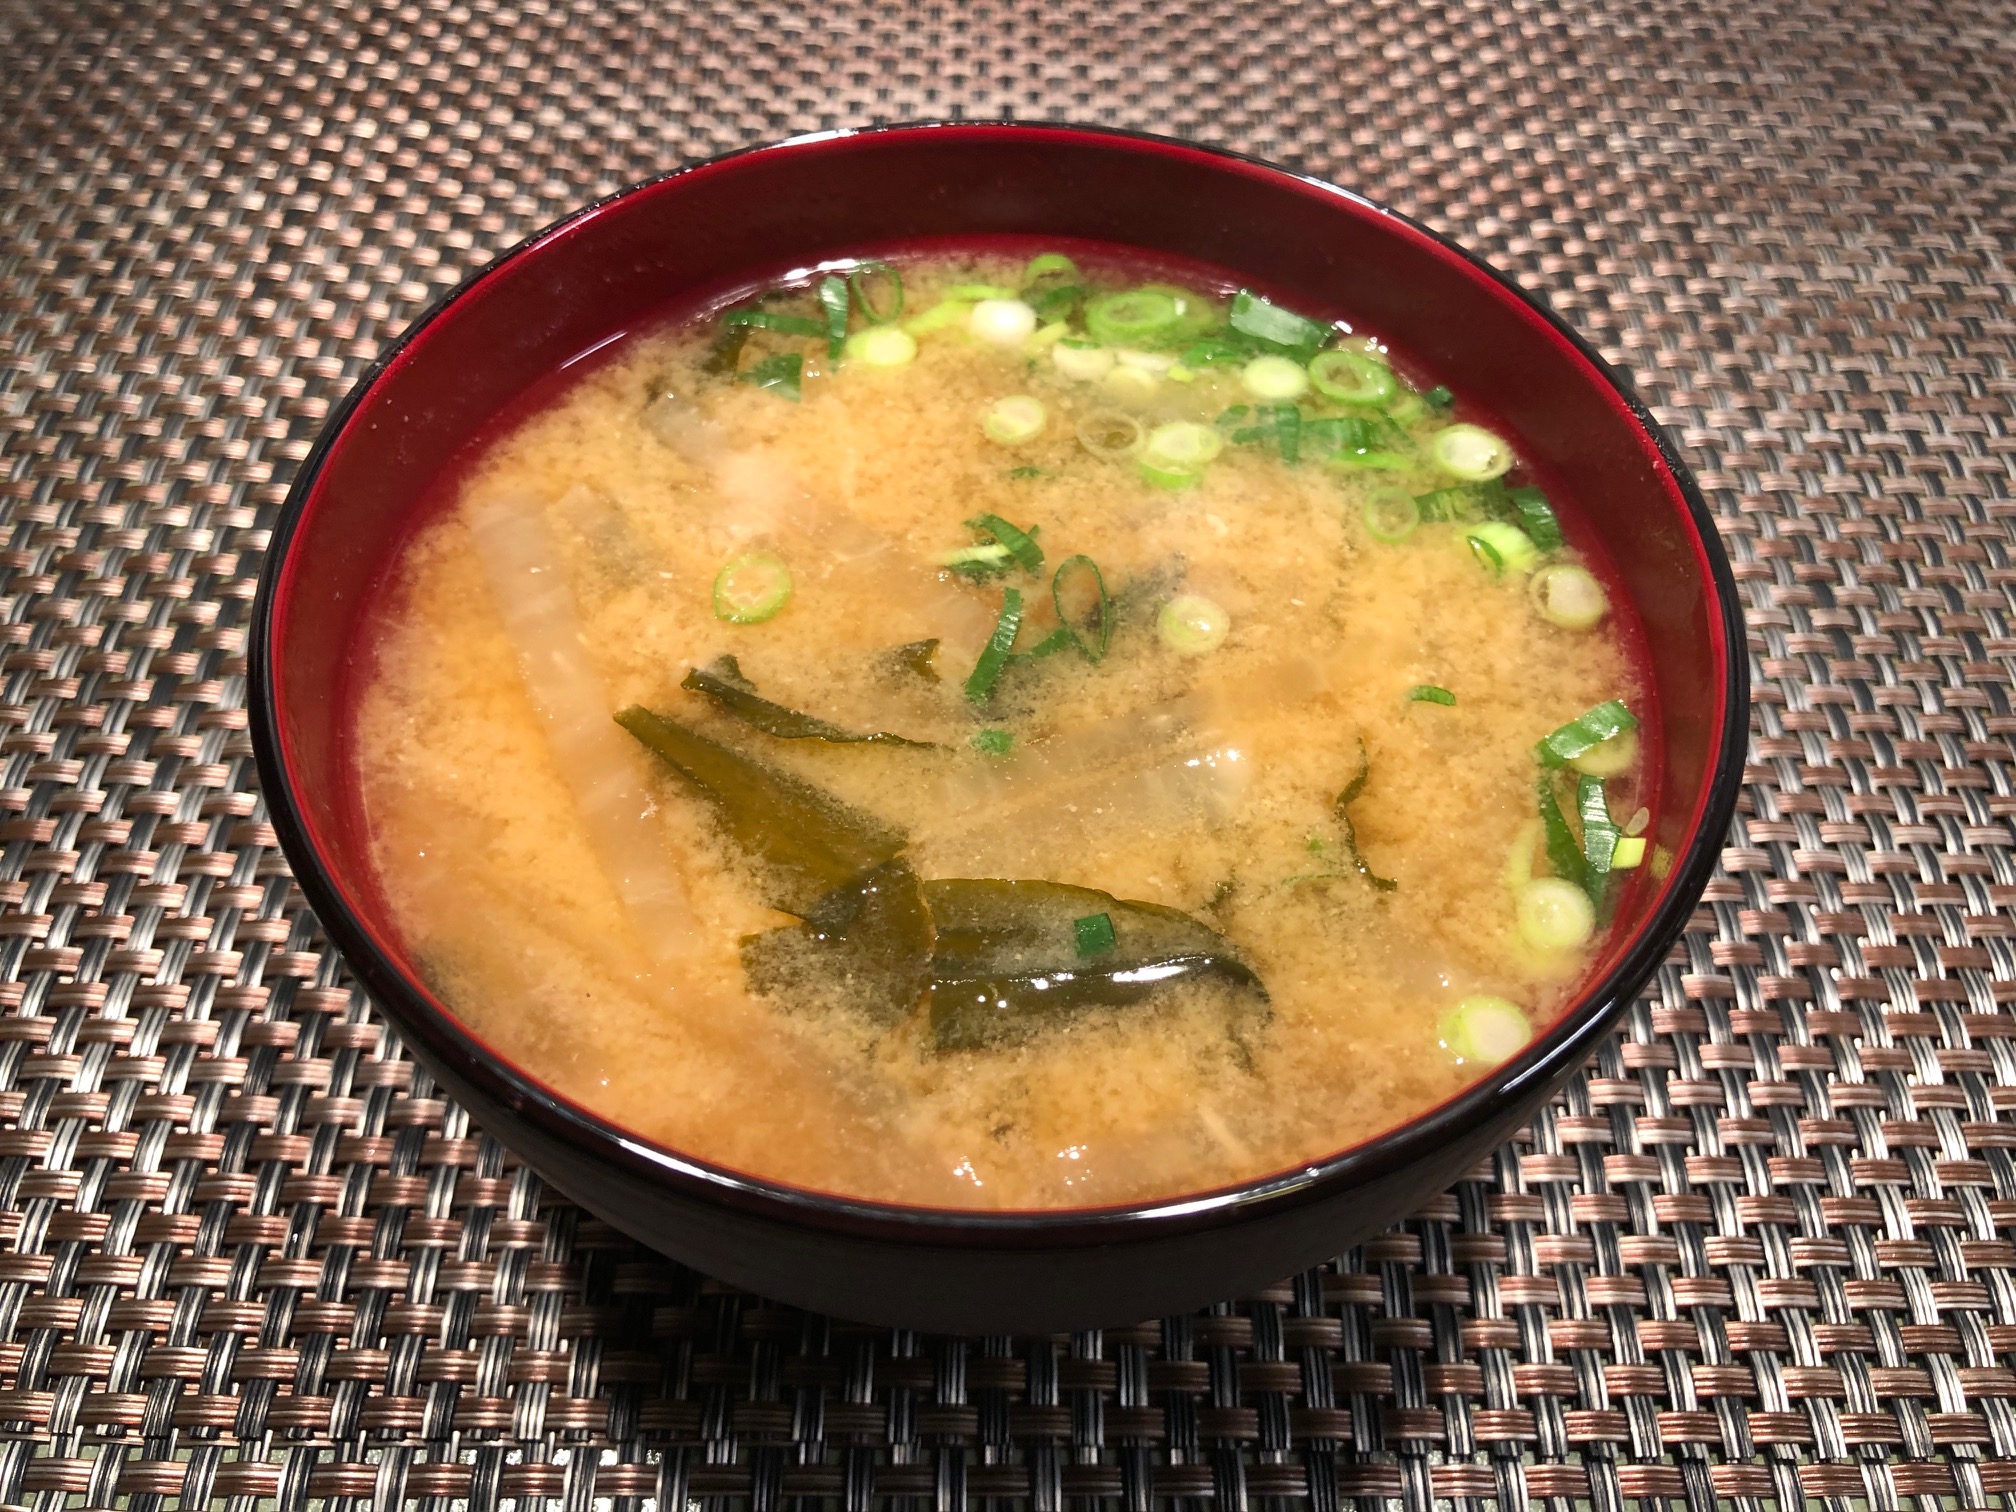 All about Japanese Miso Soup